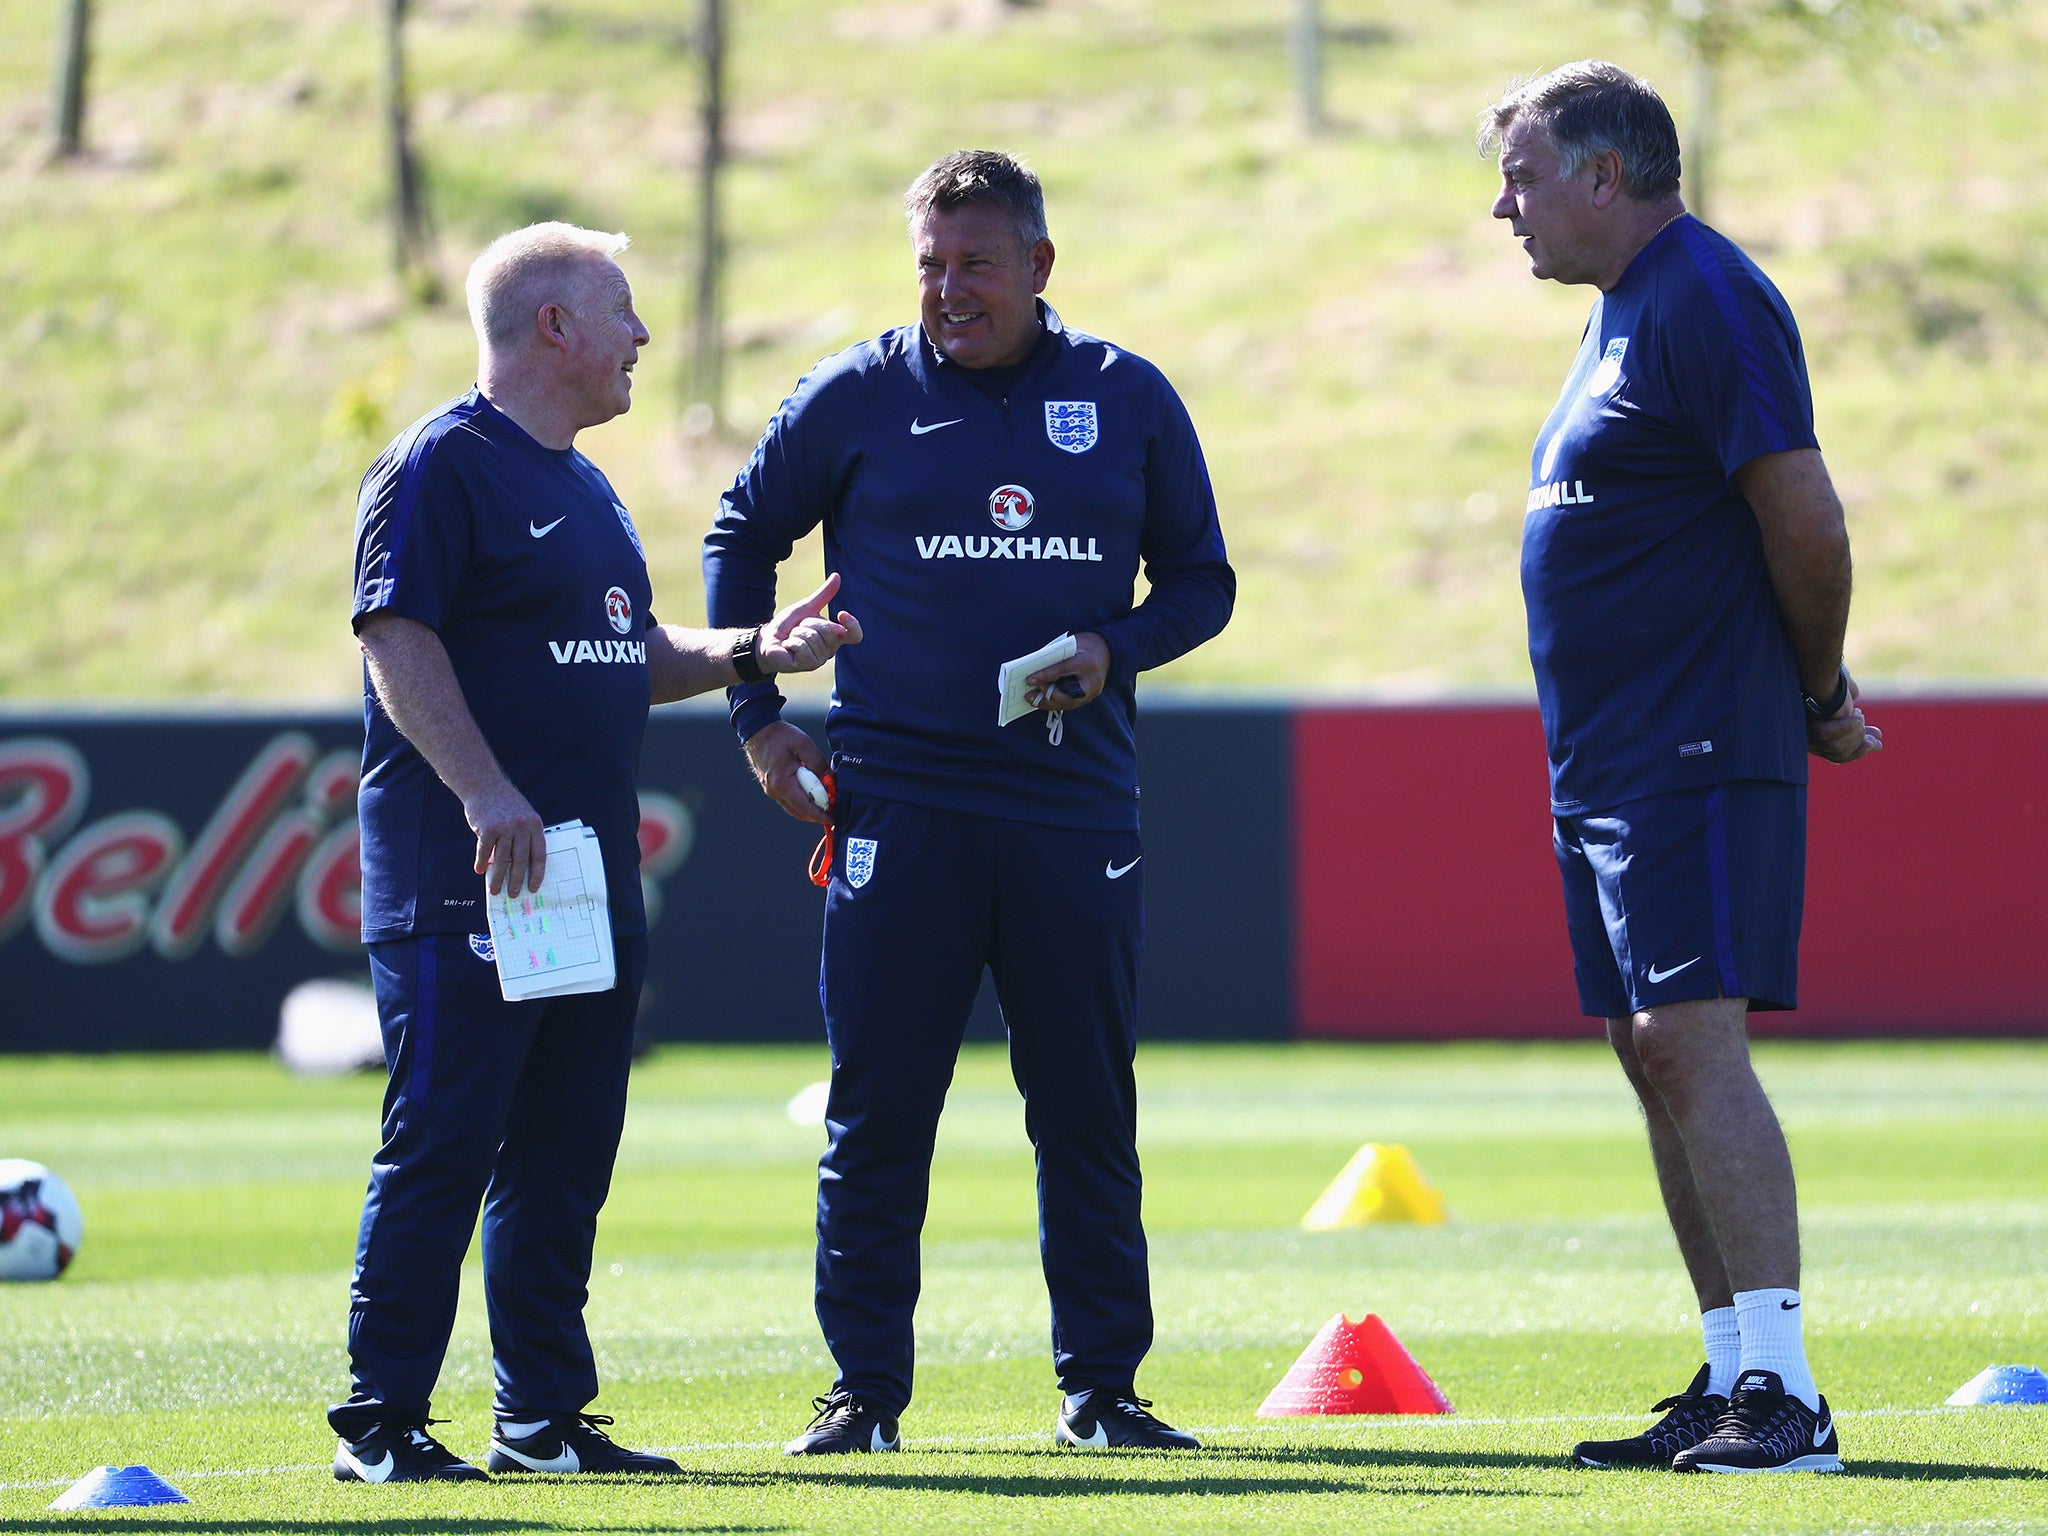 Sam Allardyce (right) speaks with Lee and Shakespeare during an England training session